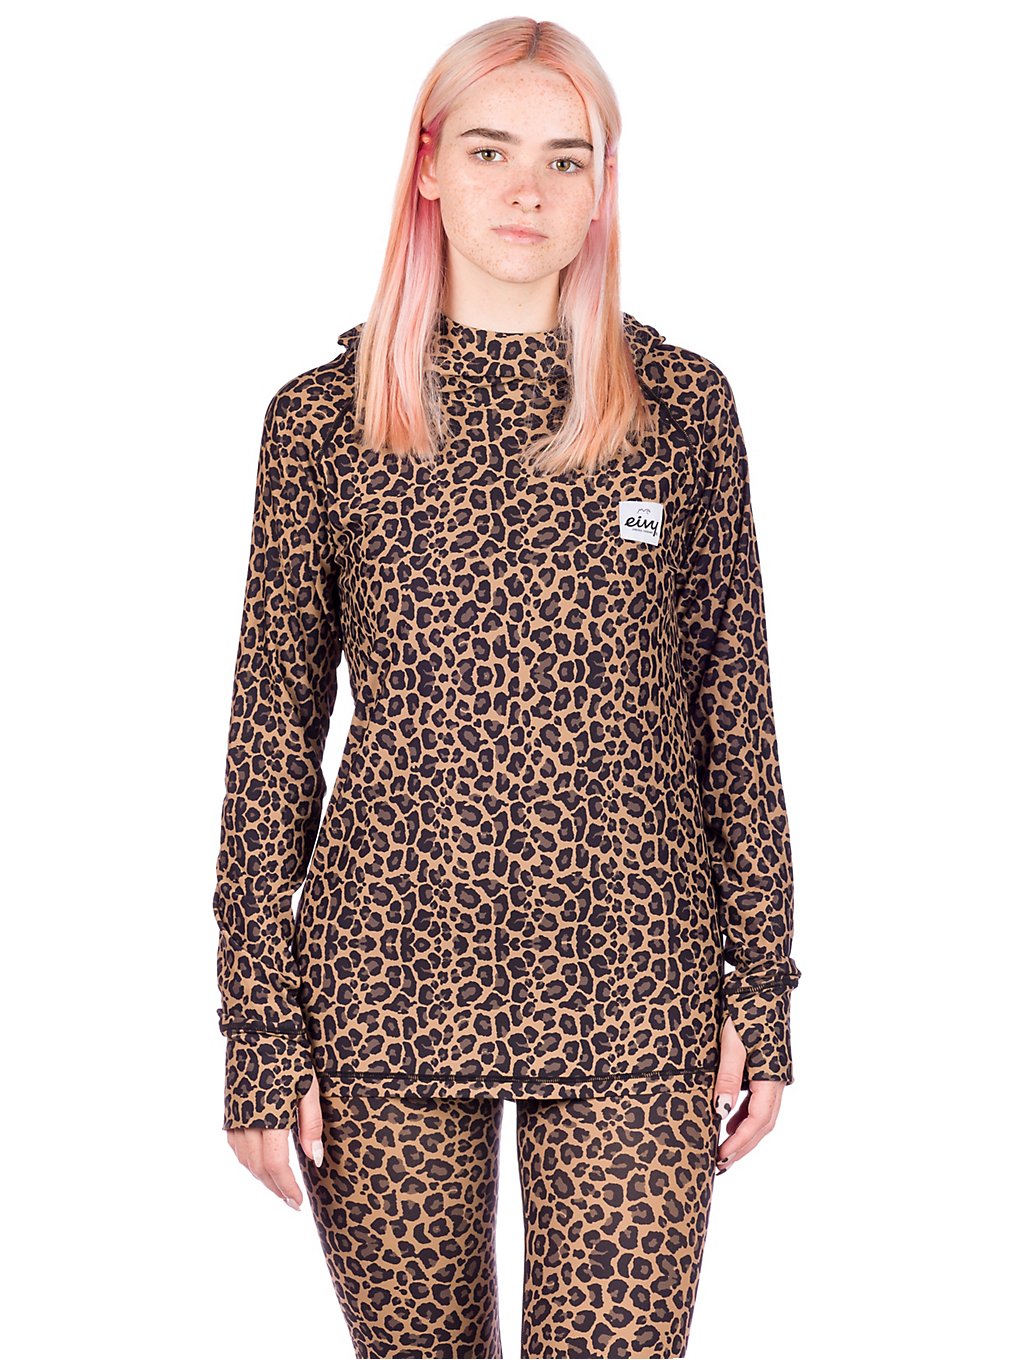 Eivy Icecold Hood Base Layer Top leopard